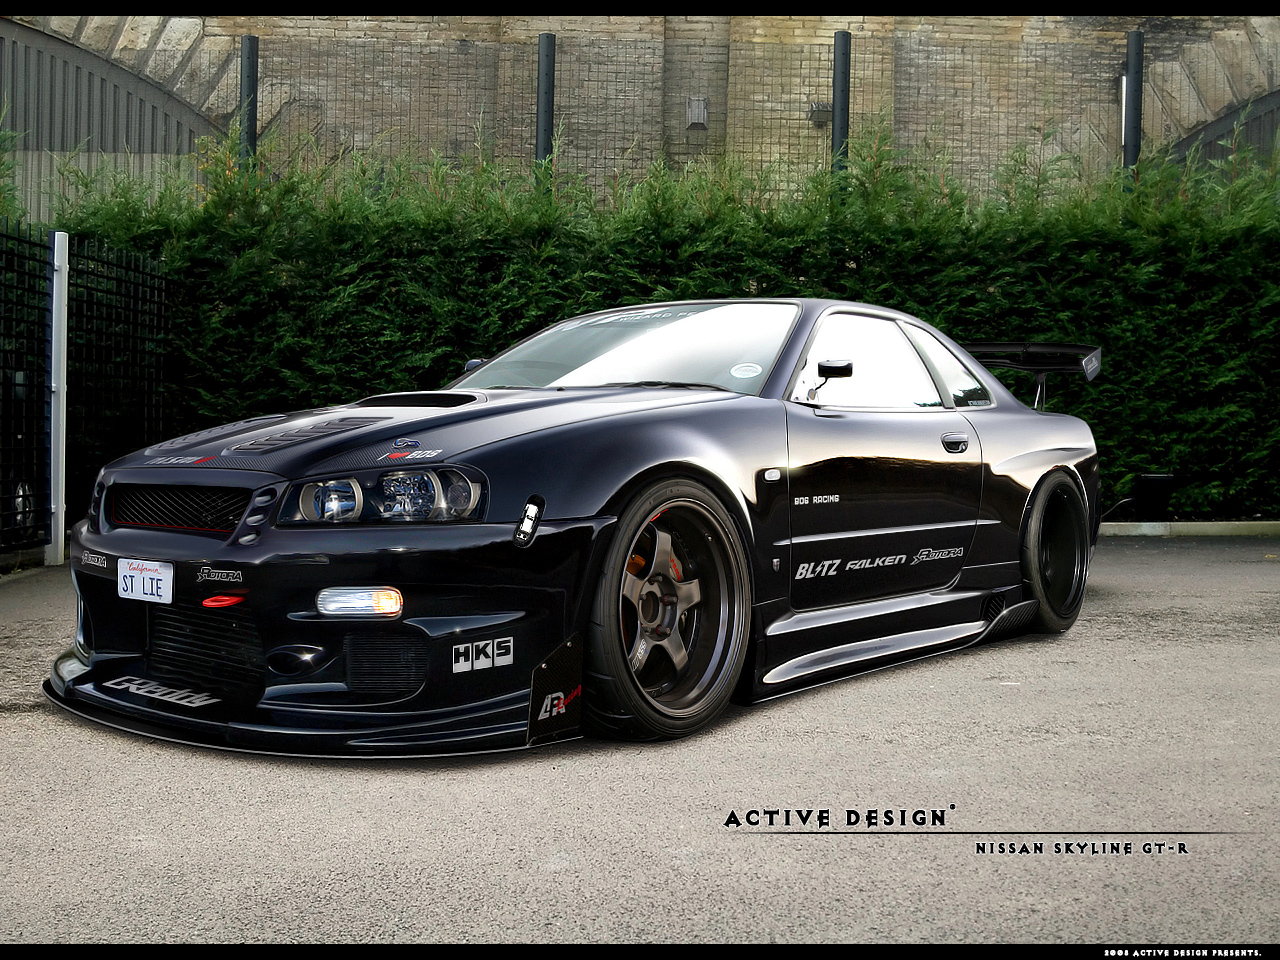 Nissan picture skylines #1